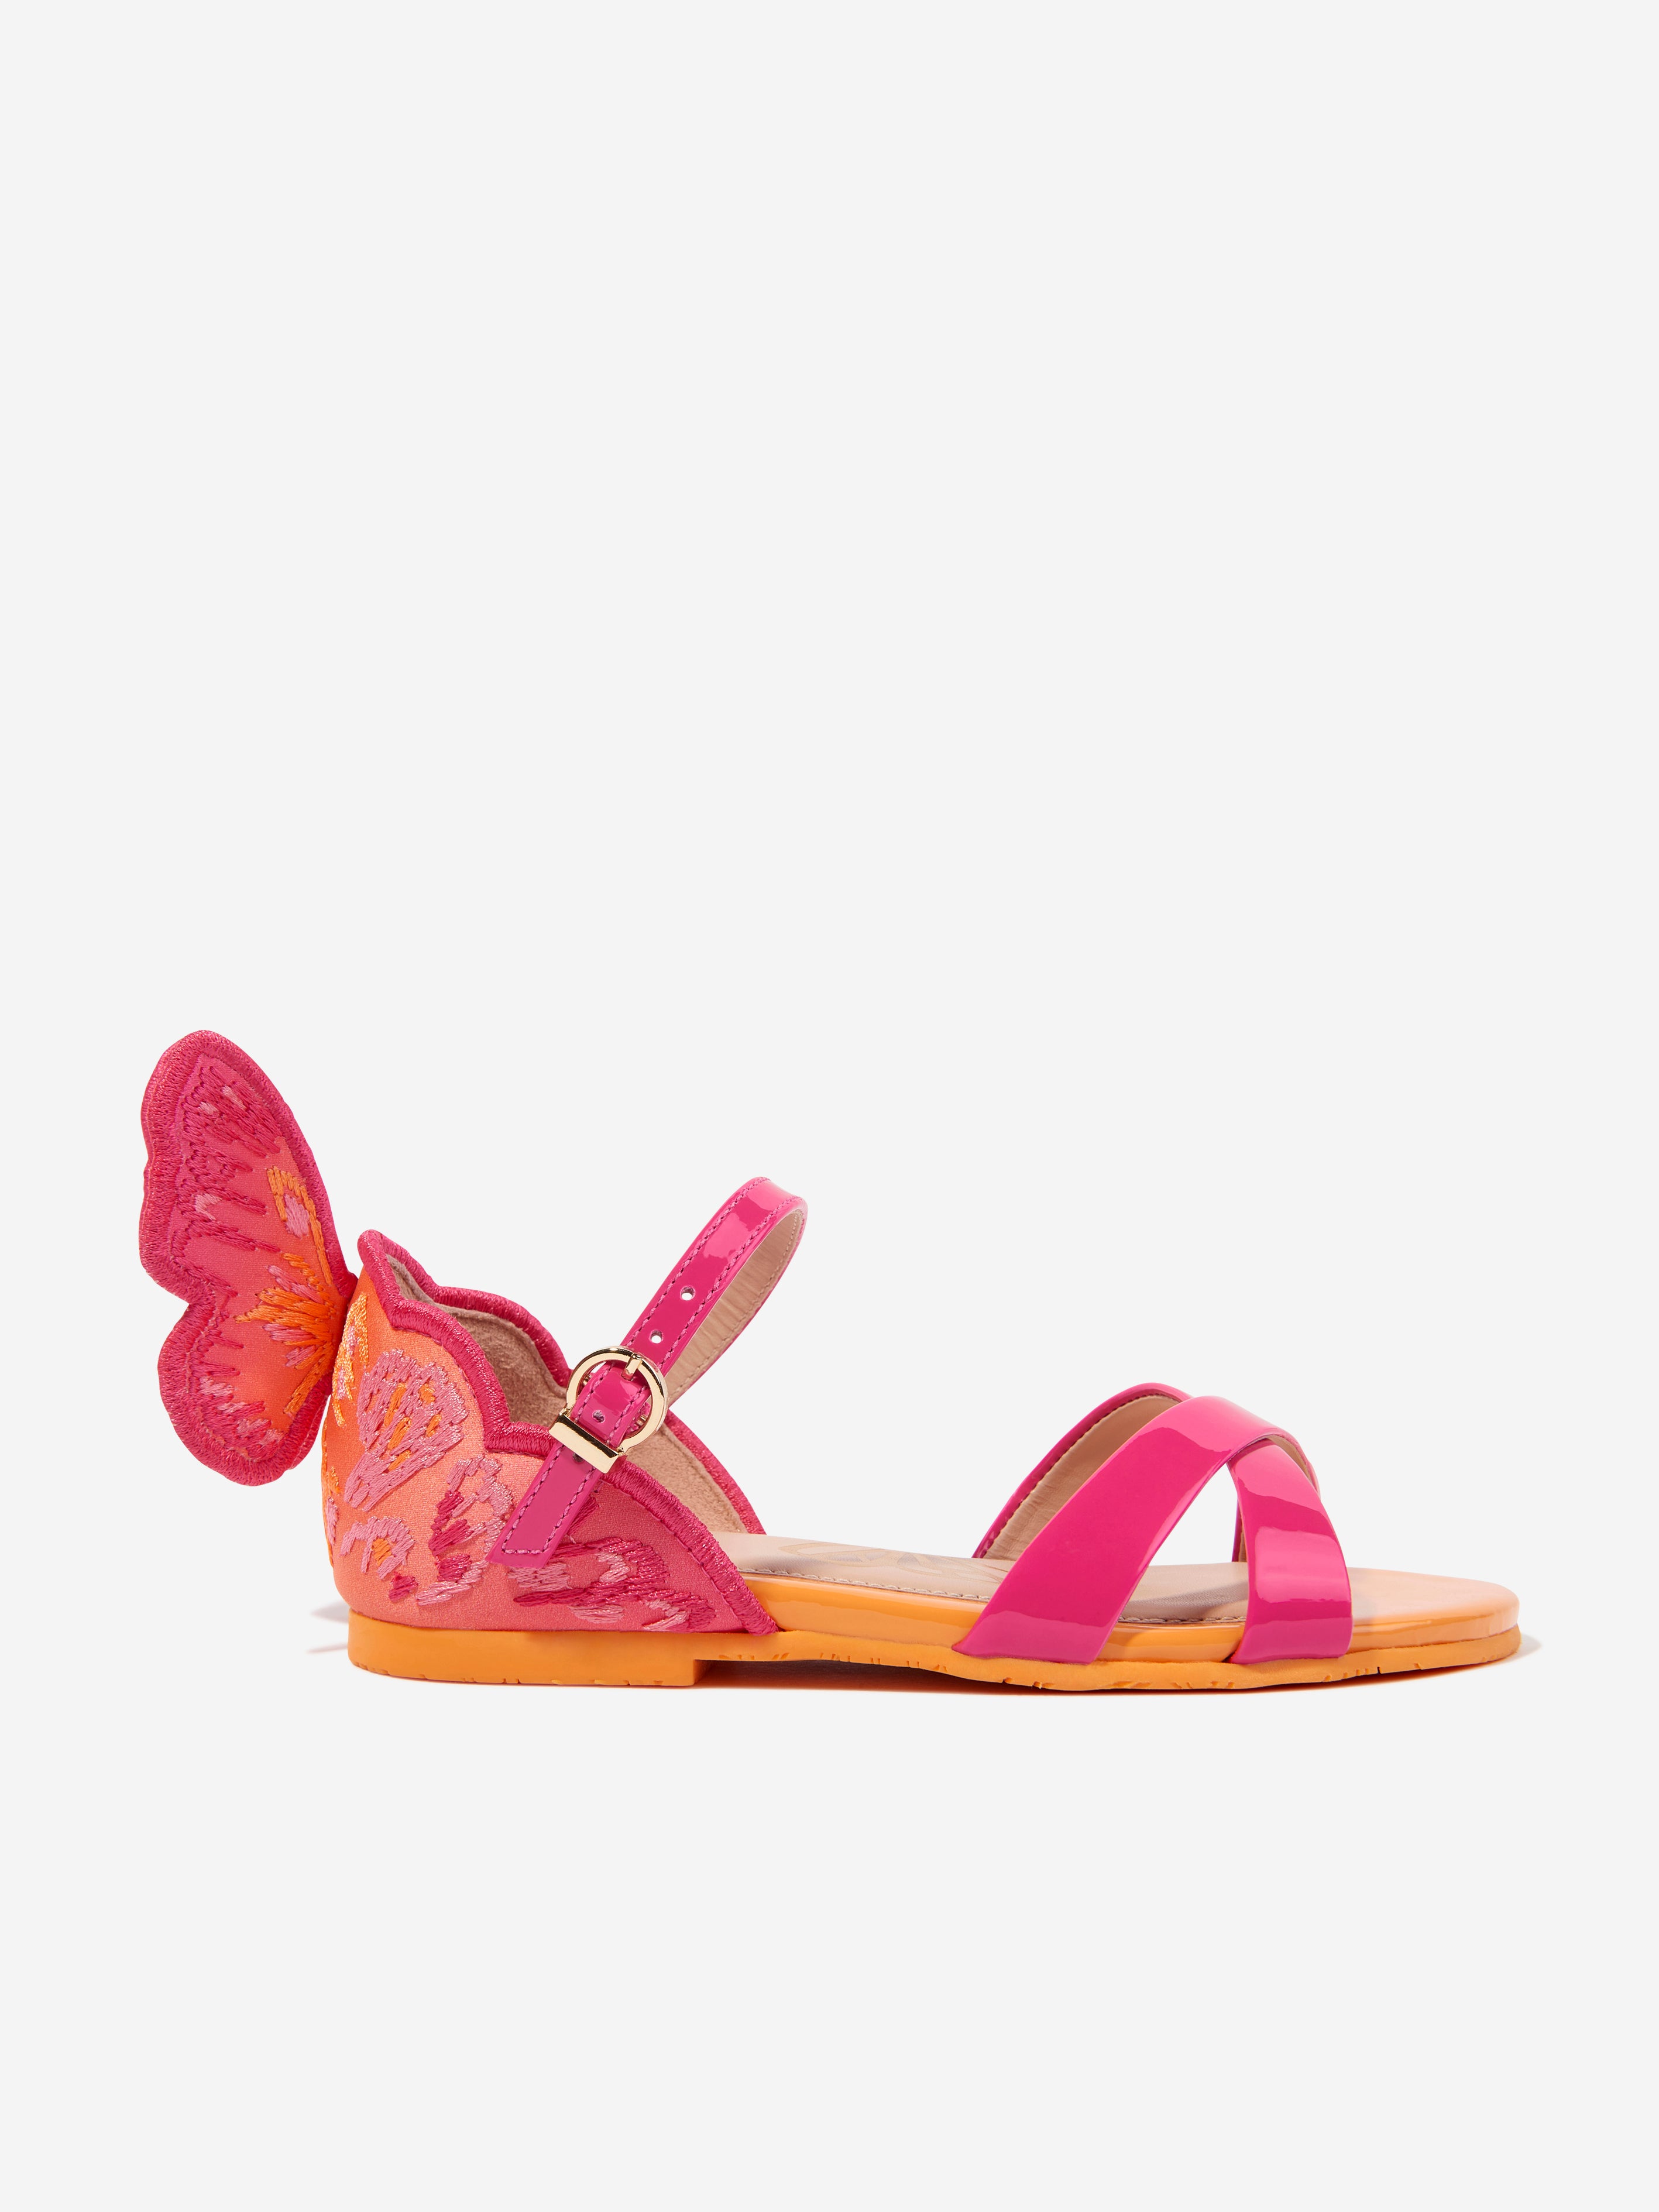 Sophia Webster Babies' Girls Leather Chiara Embroidery Sandals In Pink